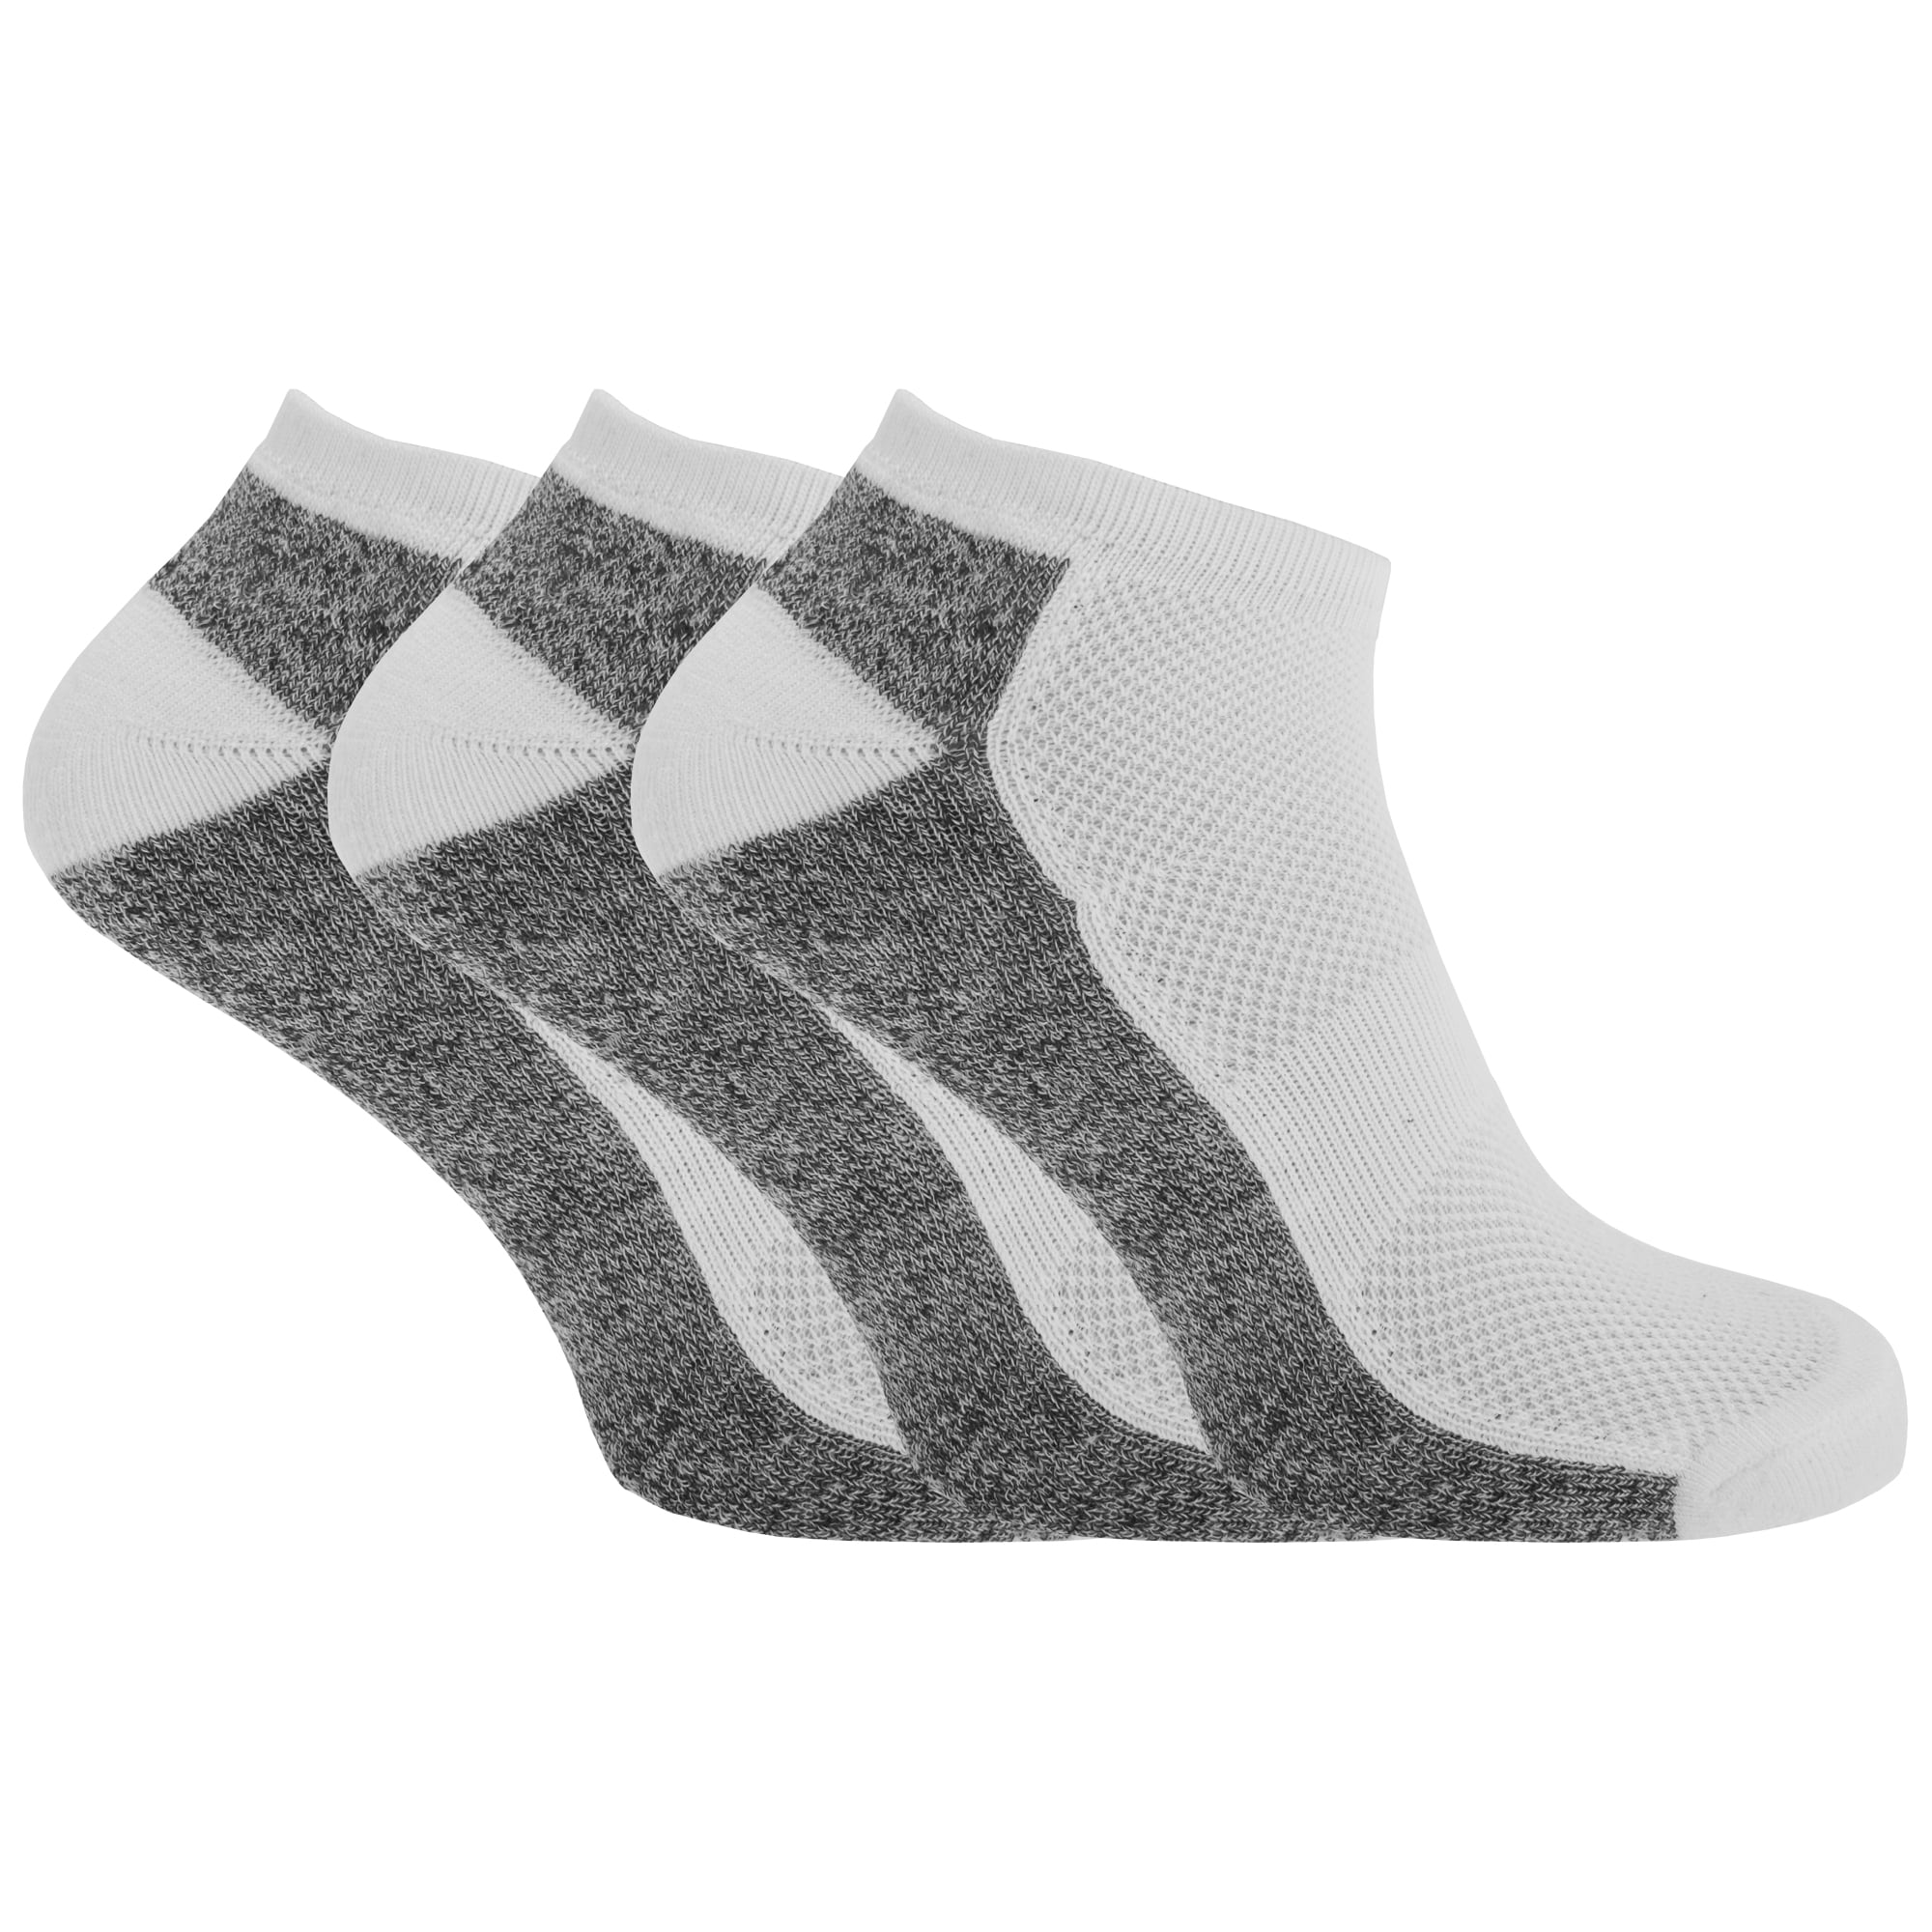 Trainer Liner Ankle Socks Mens Womens Cotton Rich Sport Black White 12 Pairs 